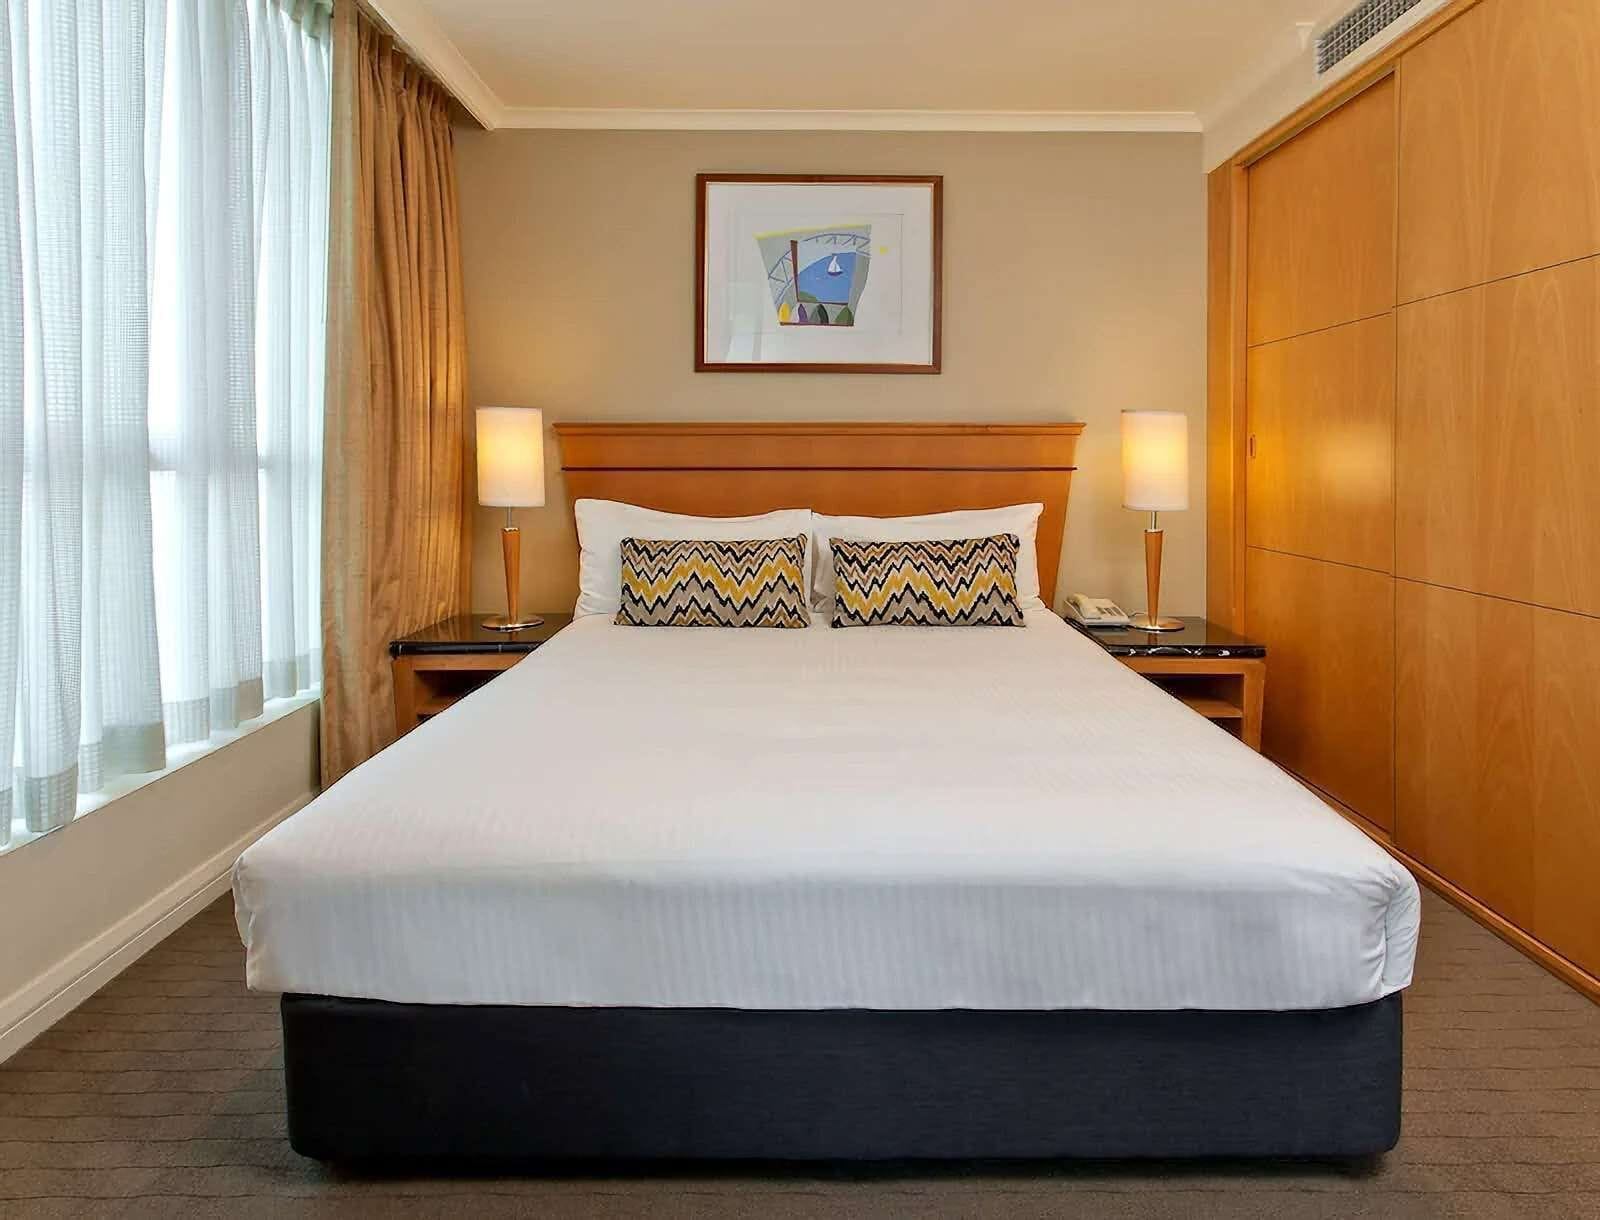 Rydges Darling Square Apartment Hotel, Sydney